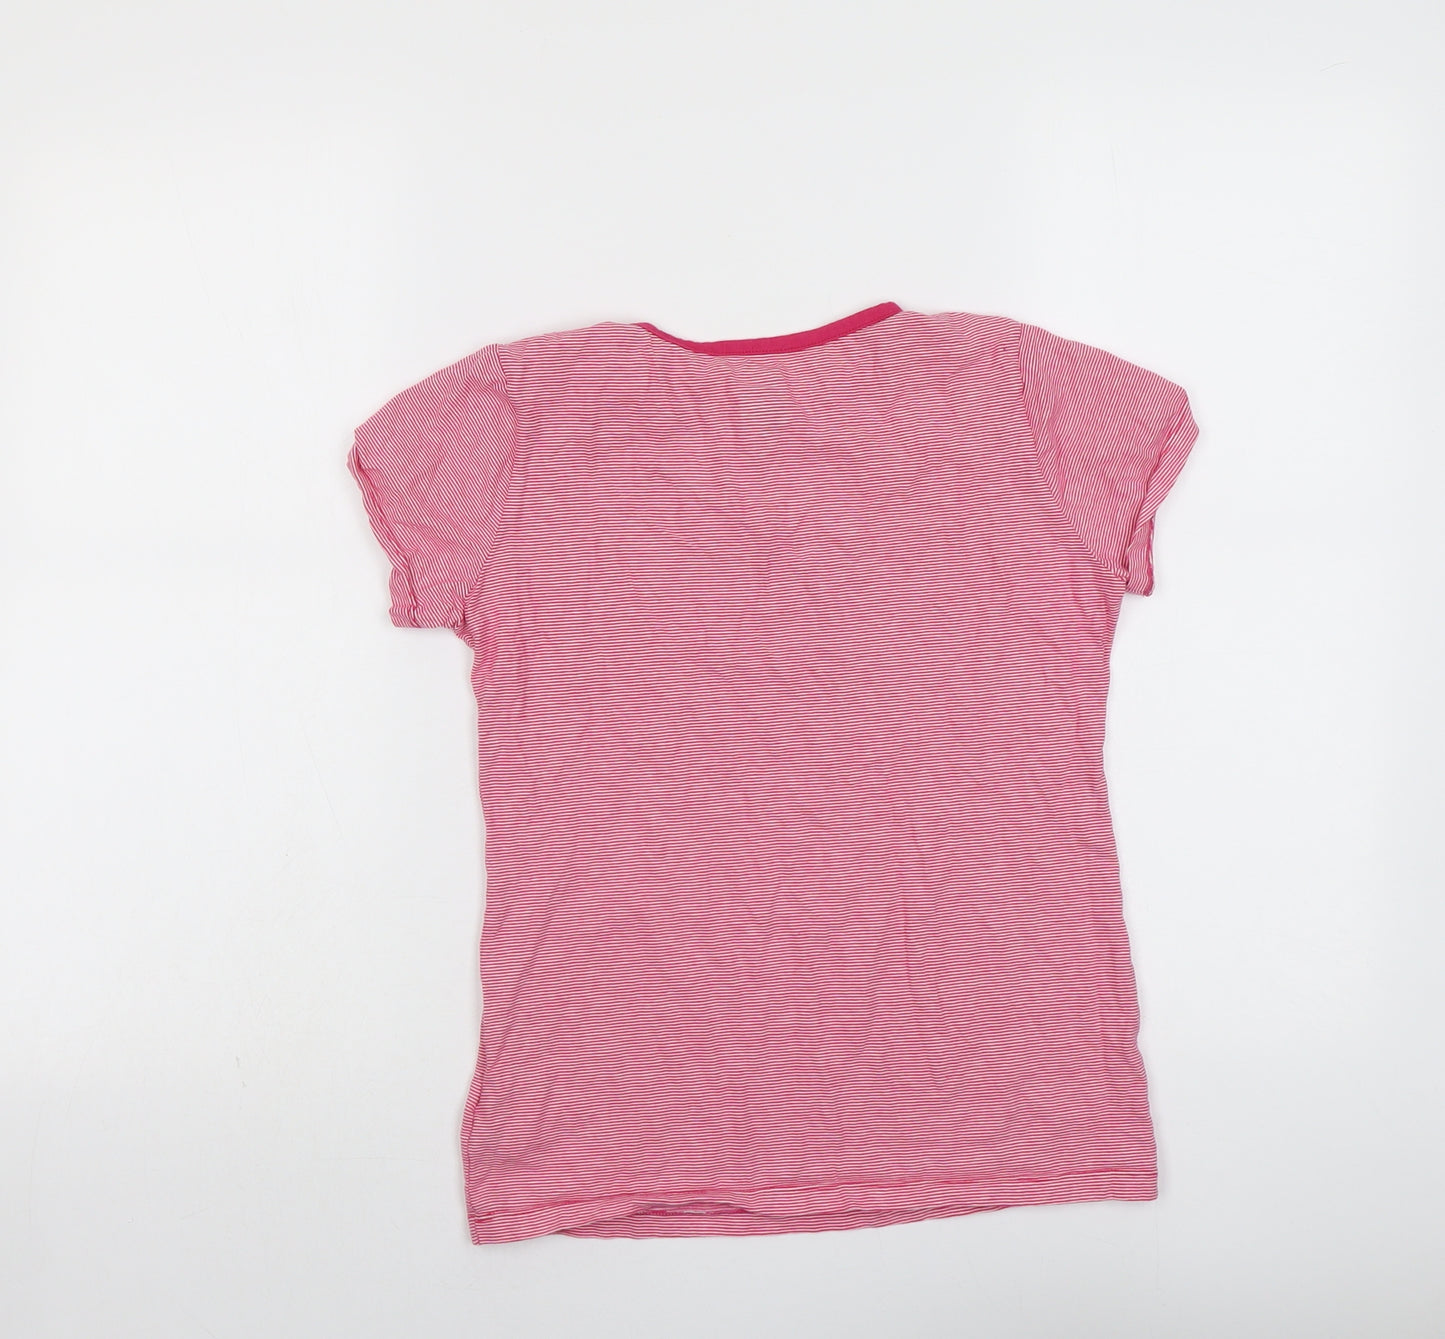 Nike Girls Pink Striped Cotton Basic T-Shirt Size 12-13 Years Round Neck Pullover